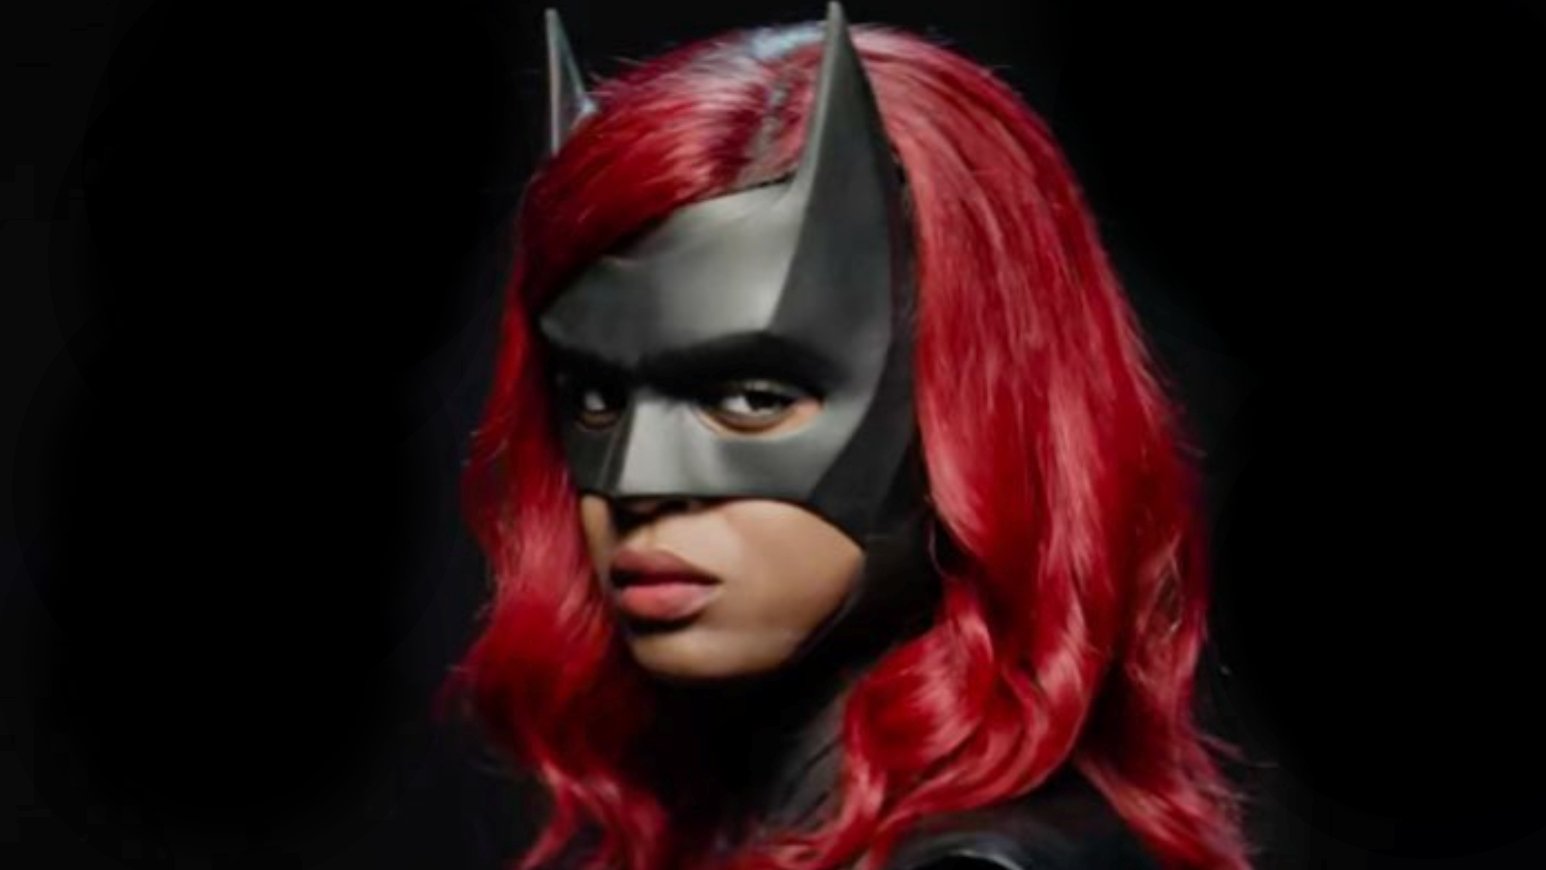 Batwoman’s TV Series Batmobile Revealed, It’s Awesome